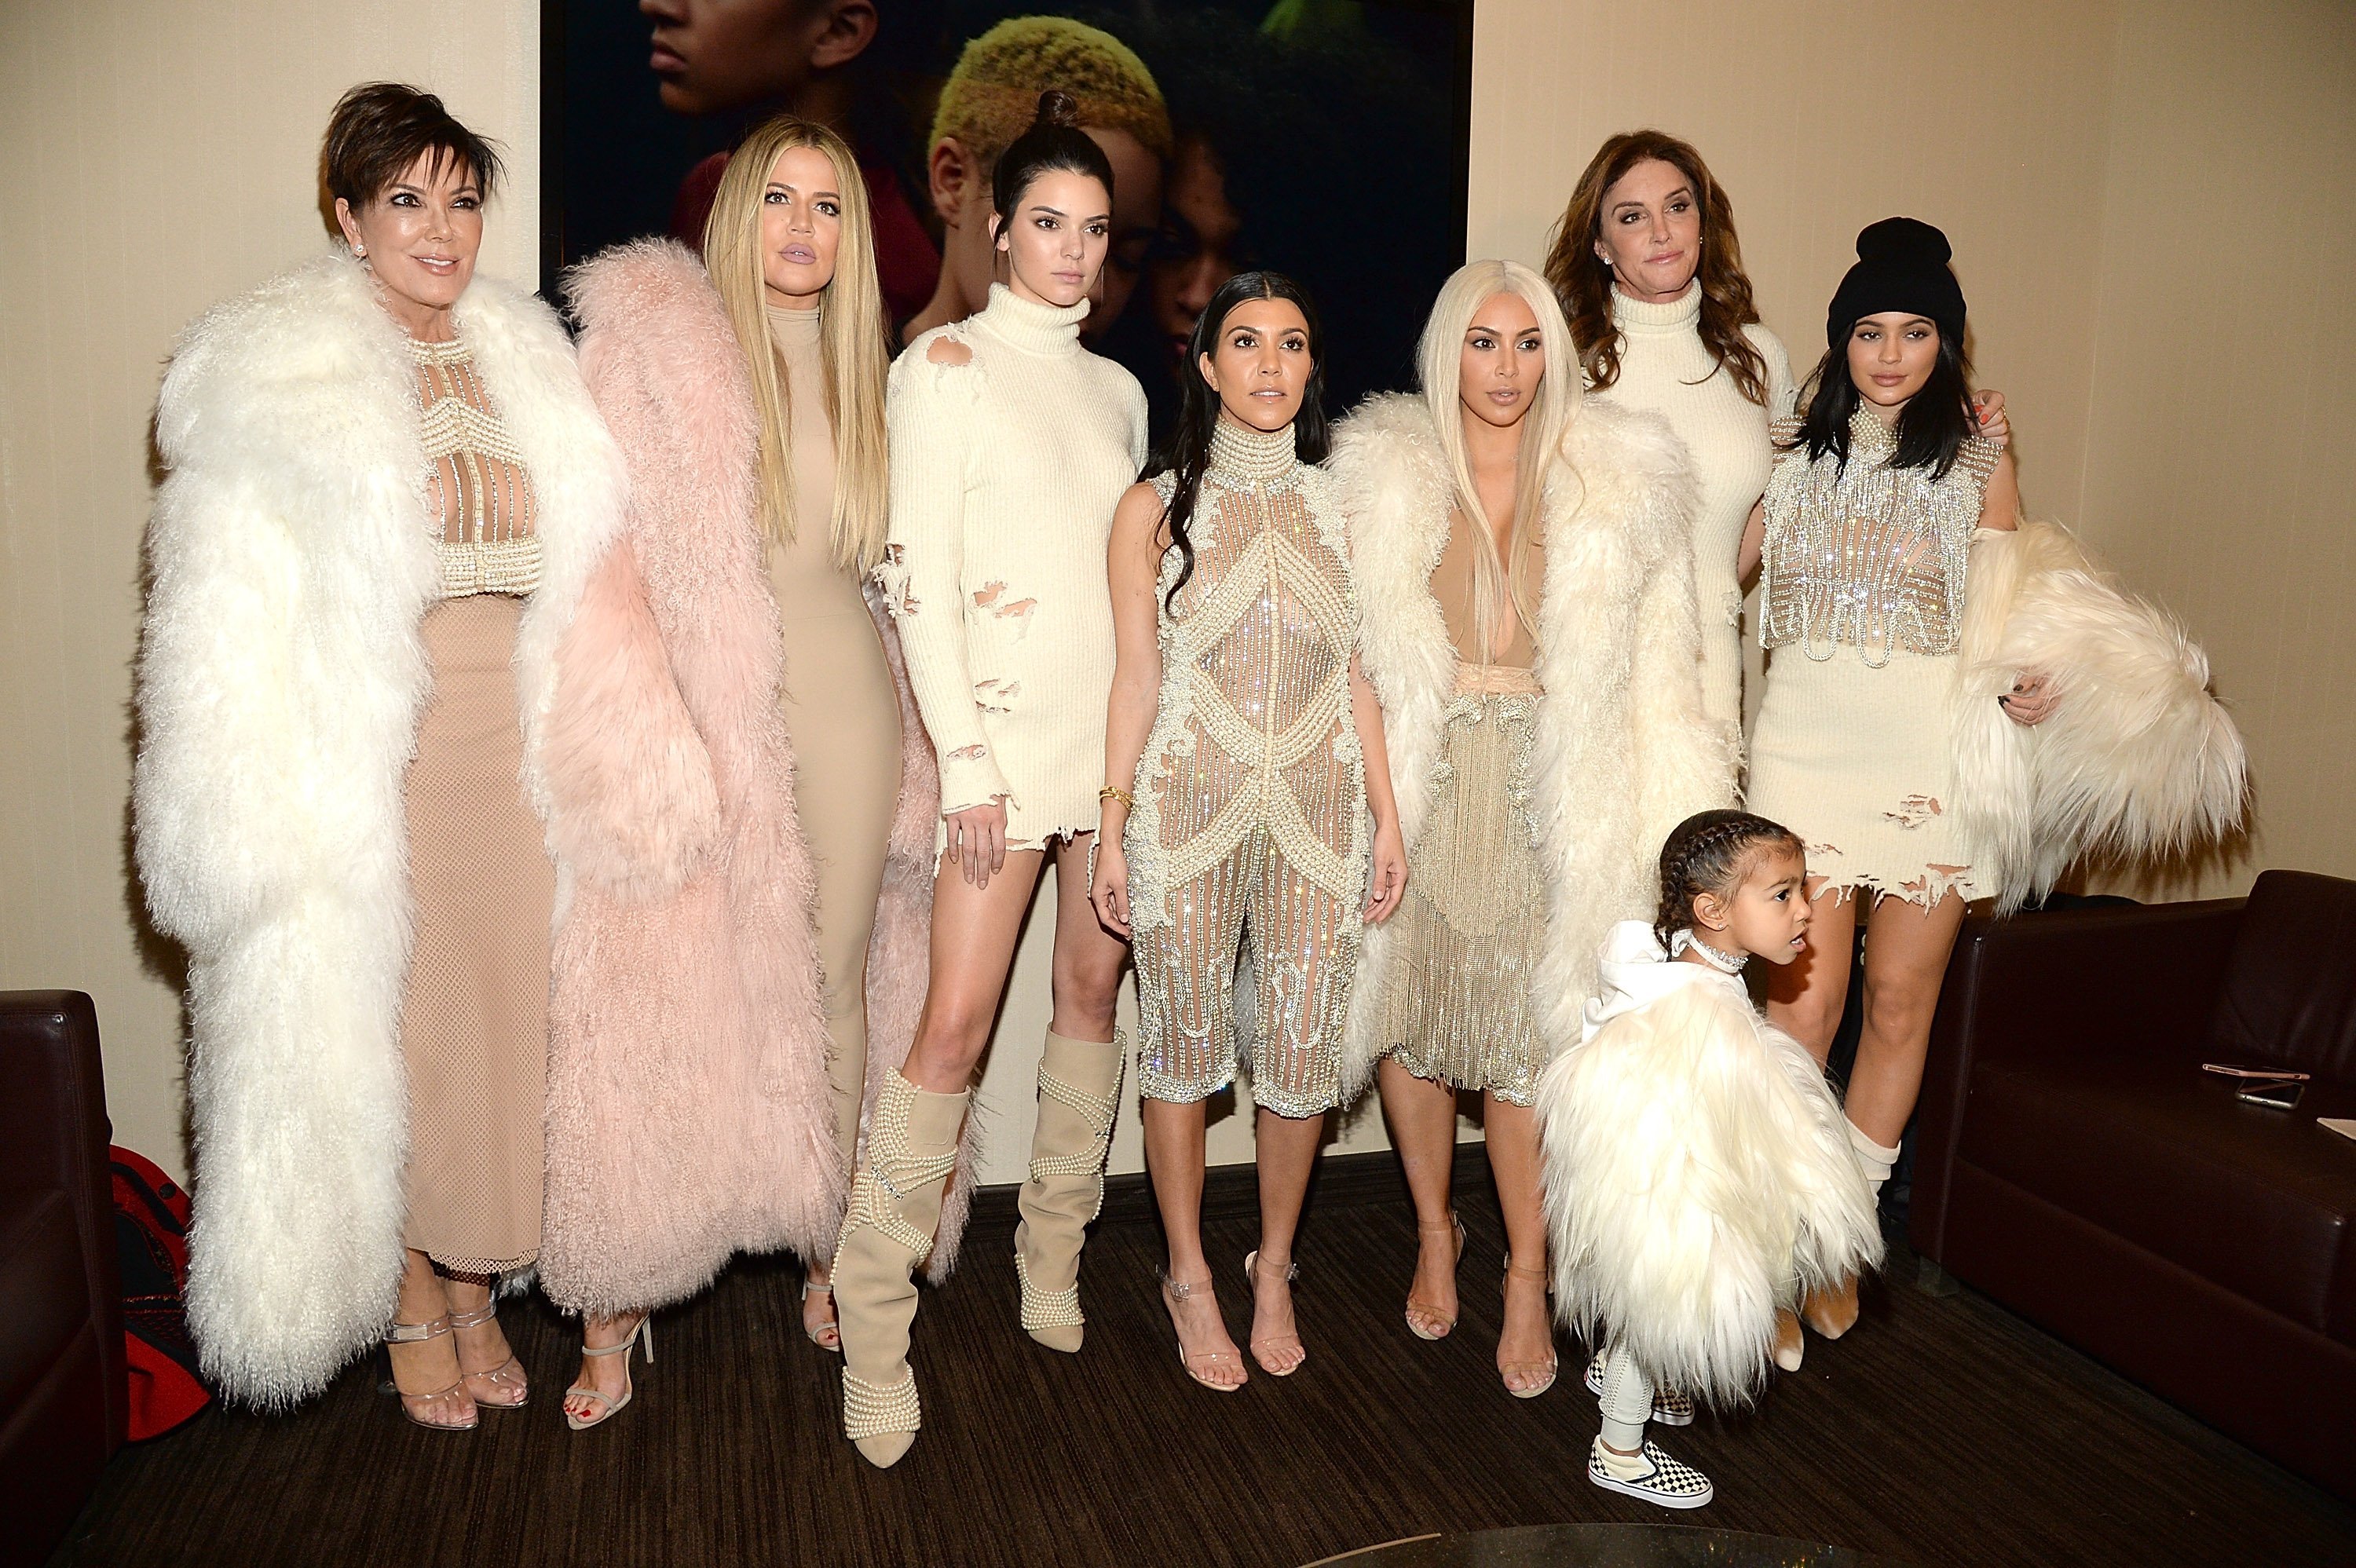 The Kardashian and Jenner family attend Kanye West Yeezy Season 3 in New York City on February 11, 2016 | Photo: Getty Images